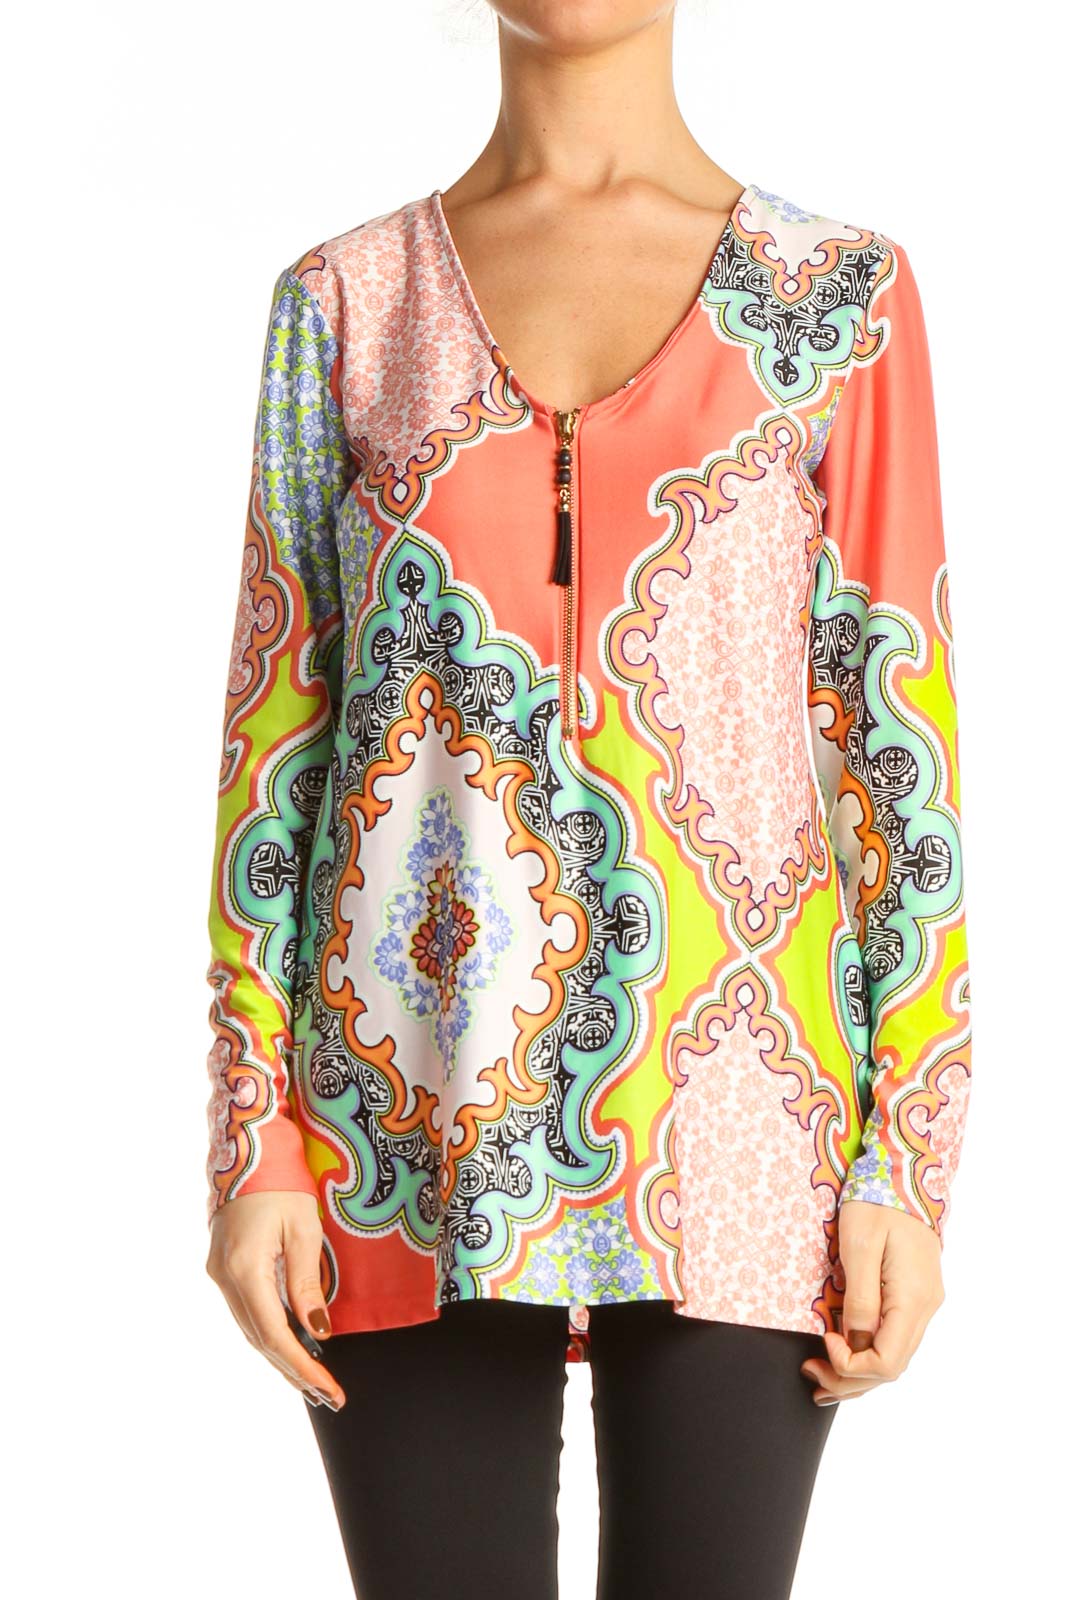 Pink Graphic Print Bohemian Blouse Front